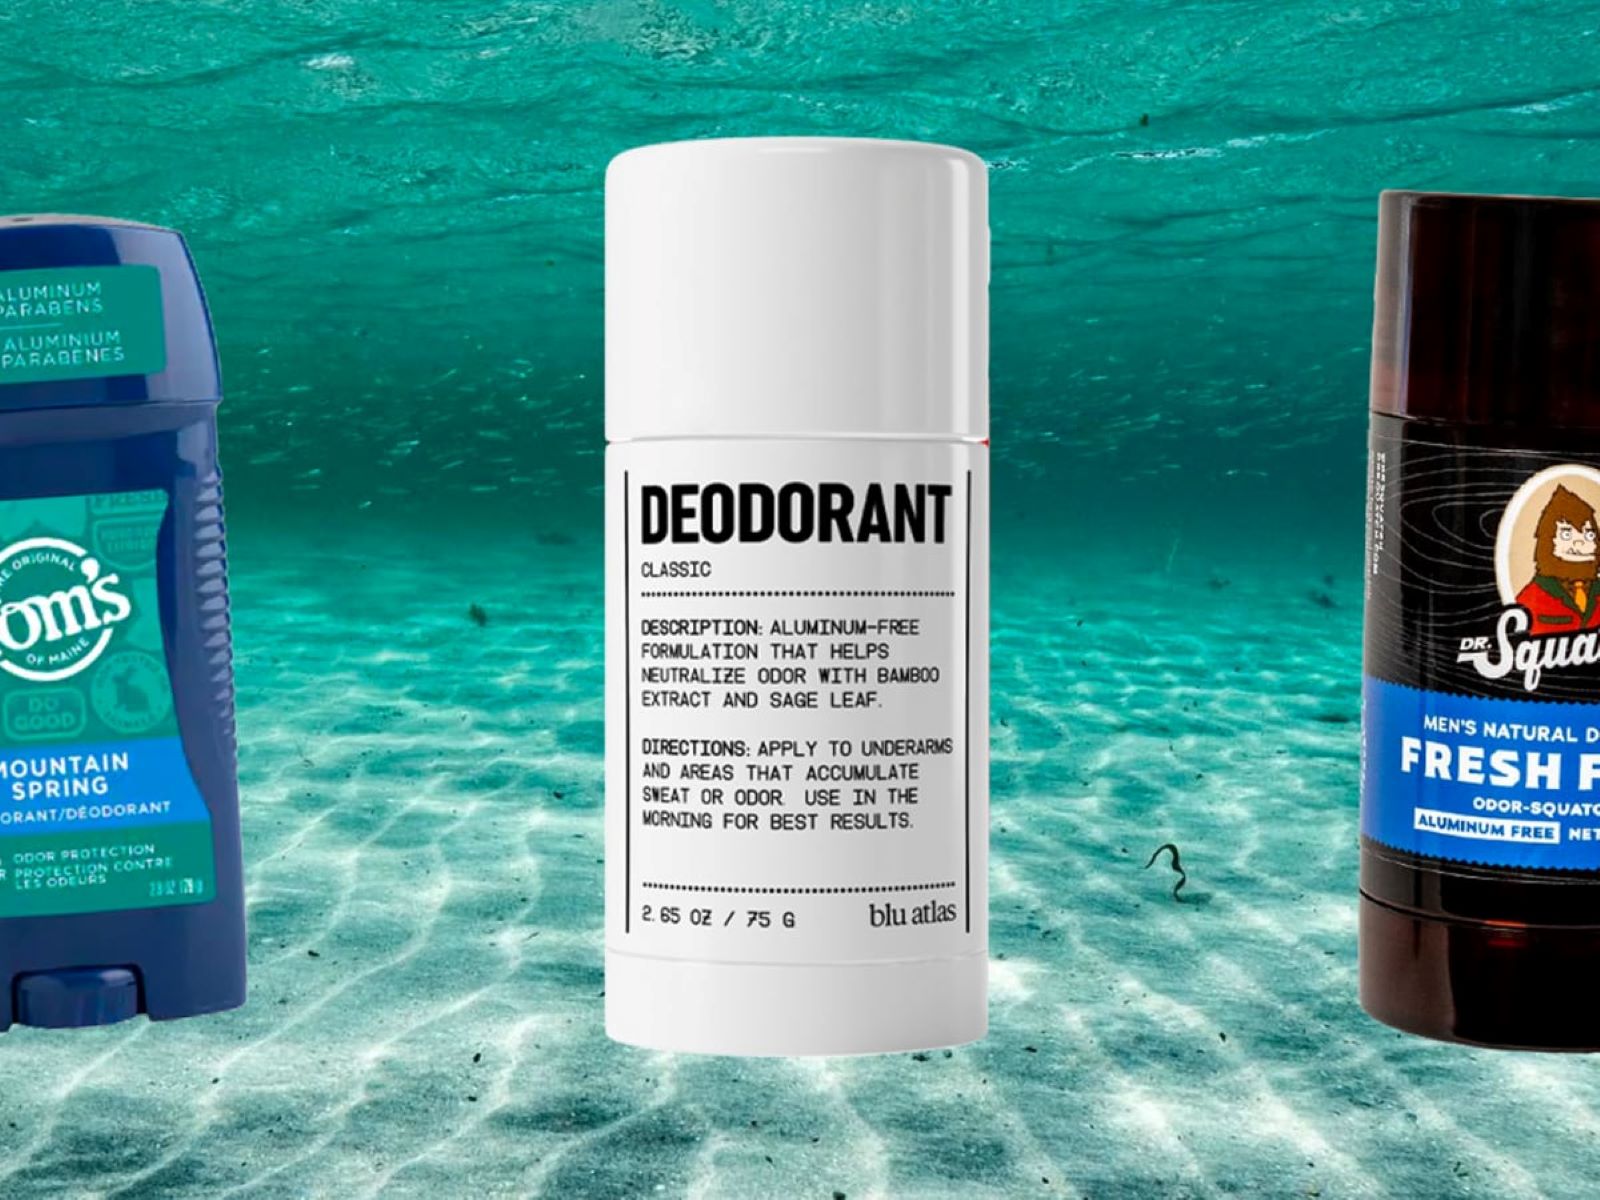 The Ultimate Guide To The Best Natural Deodorant For Men: Pros And Cons Compared To Regular Deodorants!